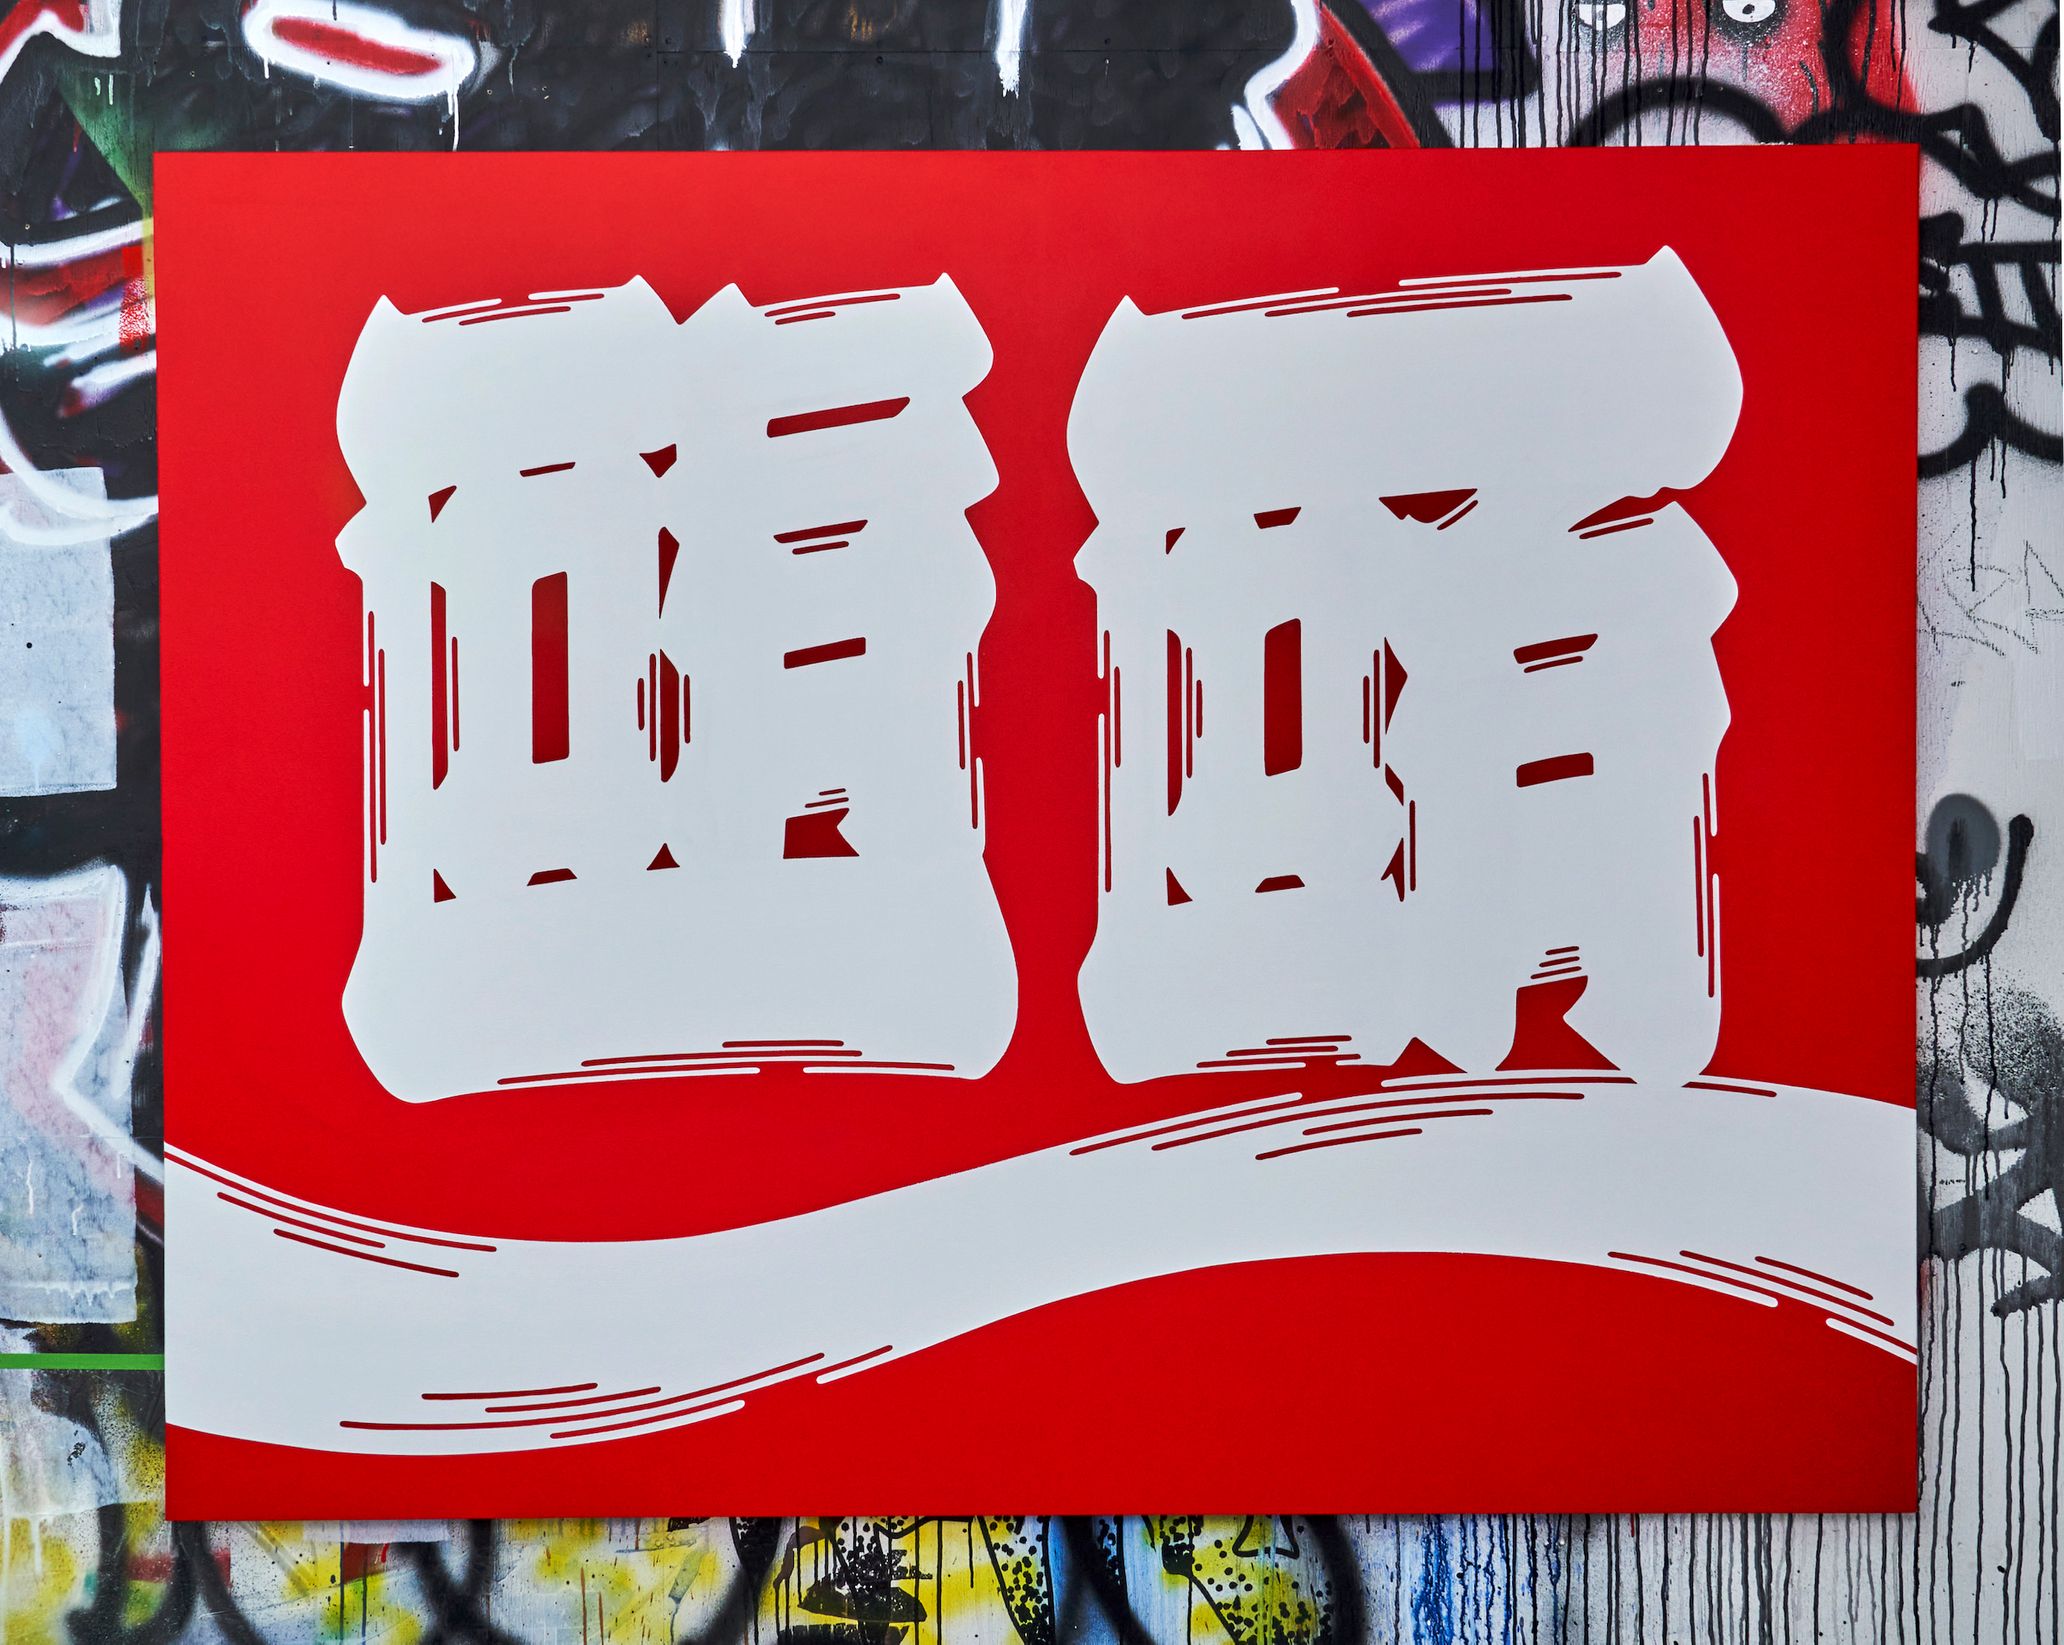 Kanji-Graphy is a one-of-a-kind original graffiti work that fuses Edo characters with the alphabet. Artist sneakerwolf on breaking down stereotypes